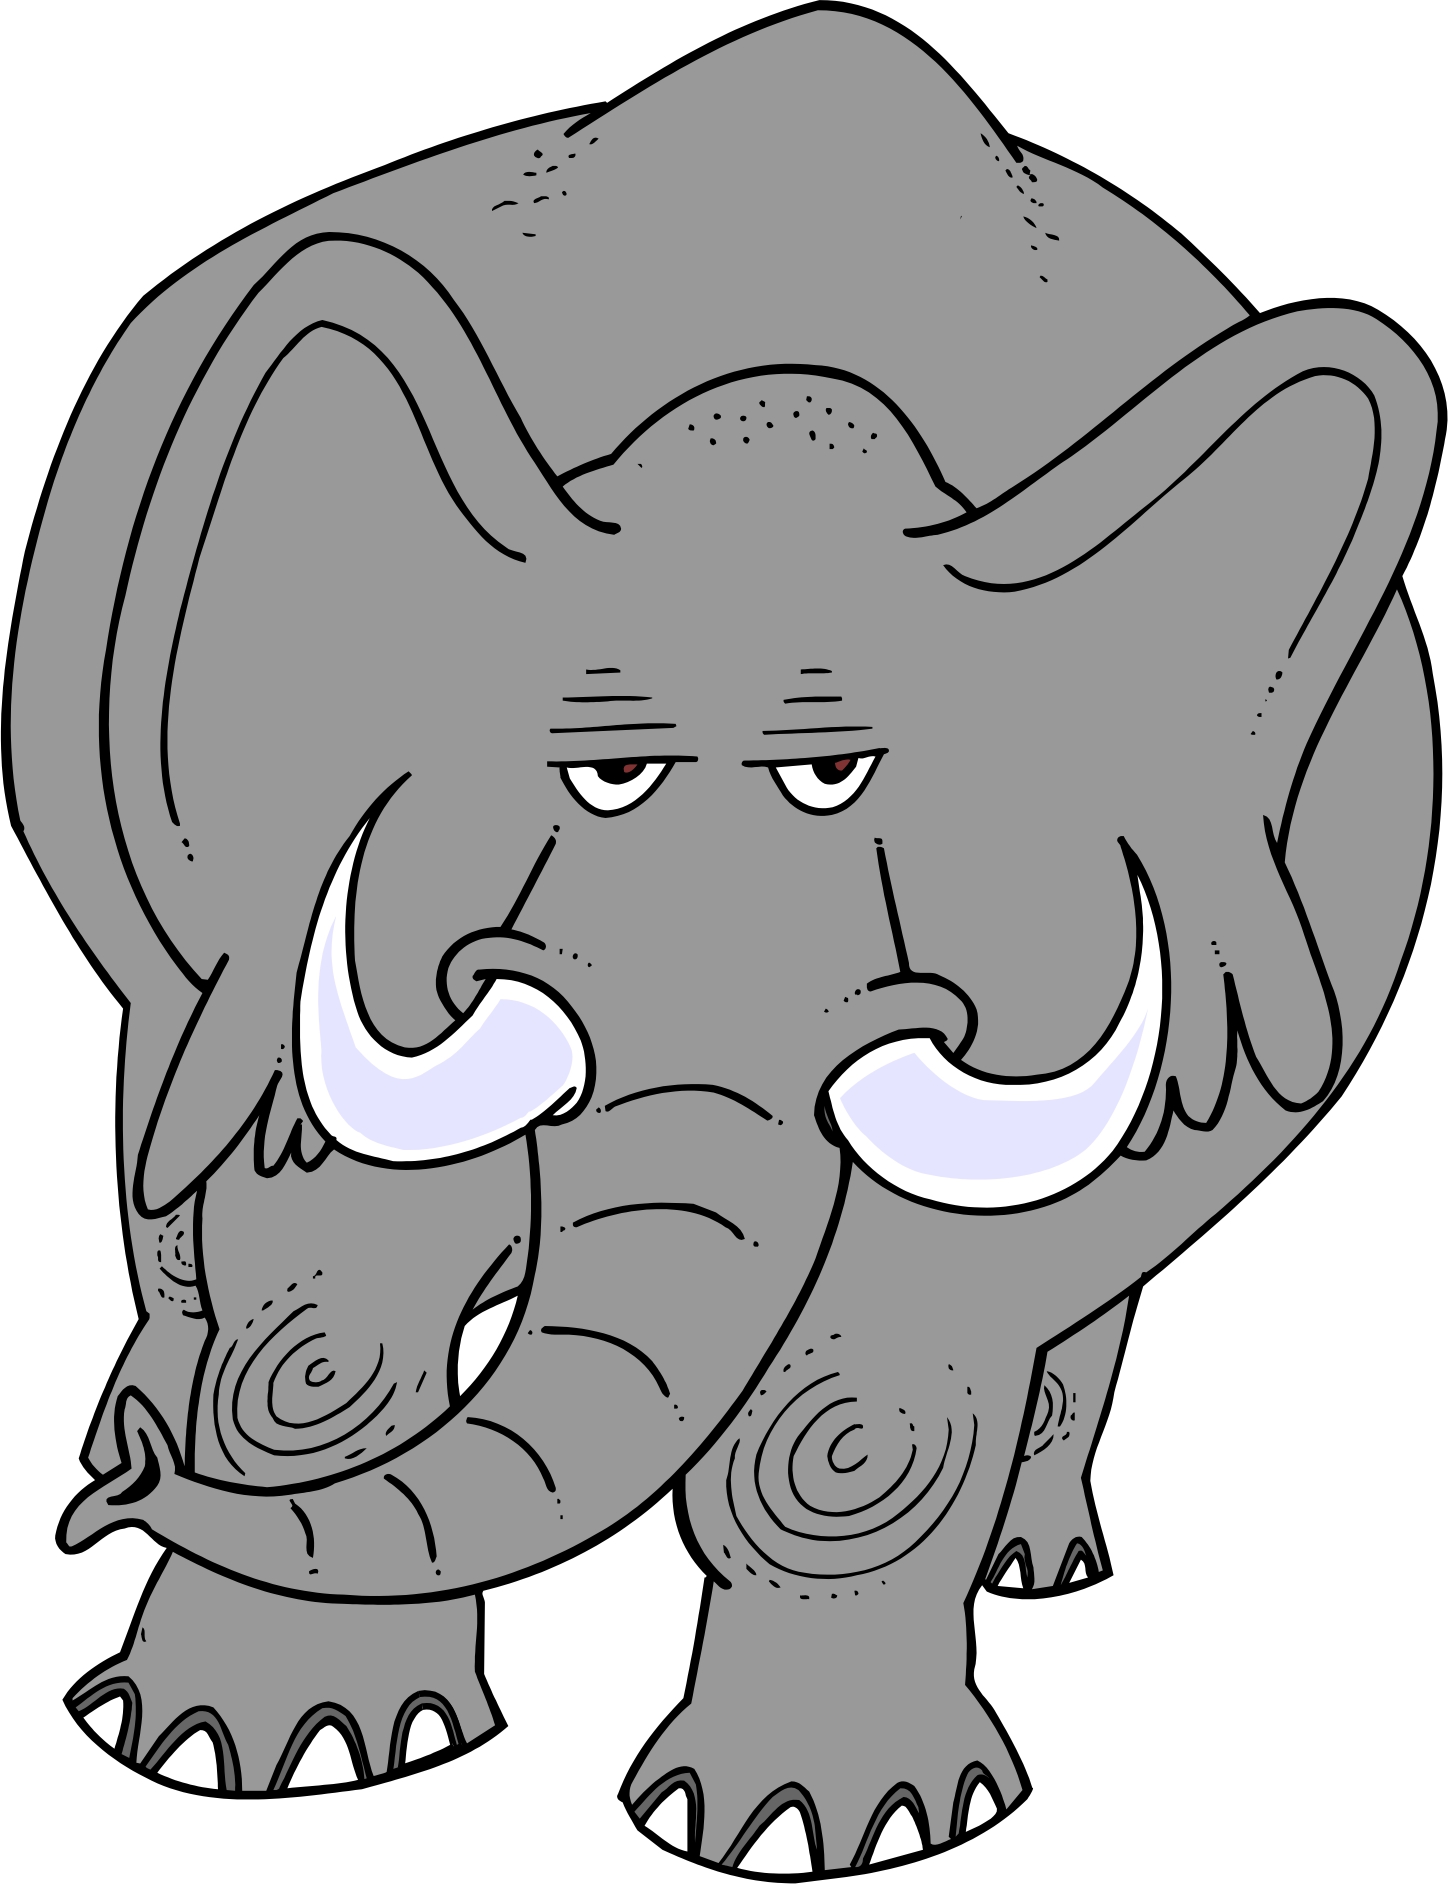 Cartoon Picture Of An Elephant - ClipArt Best